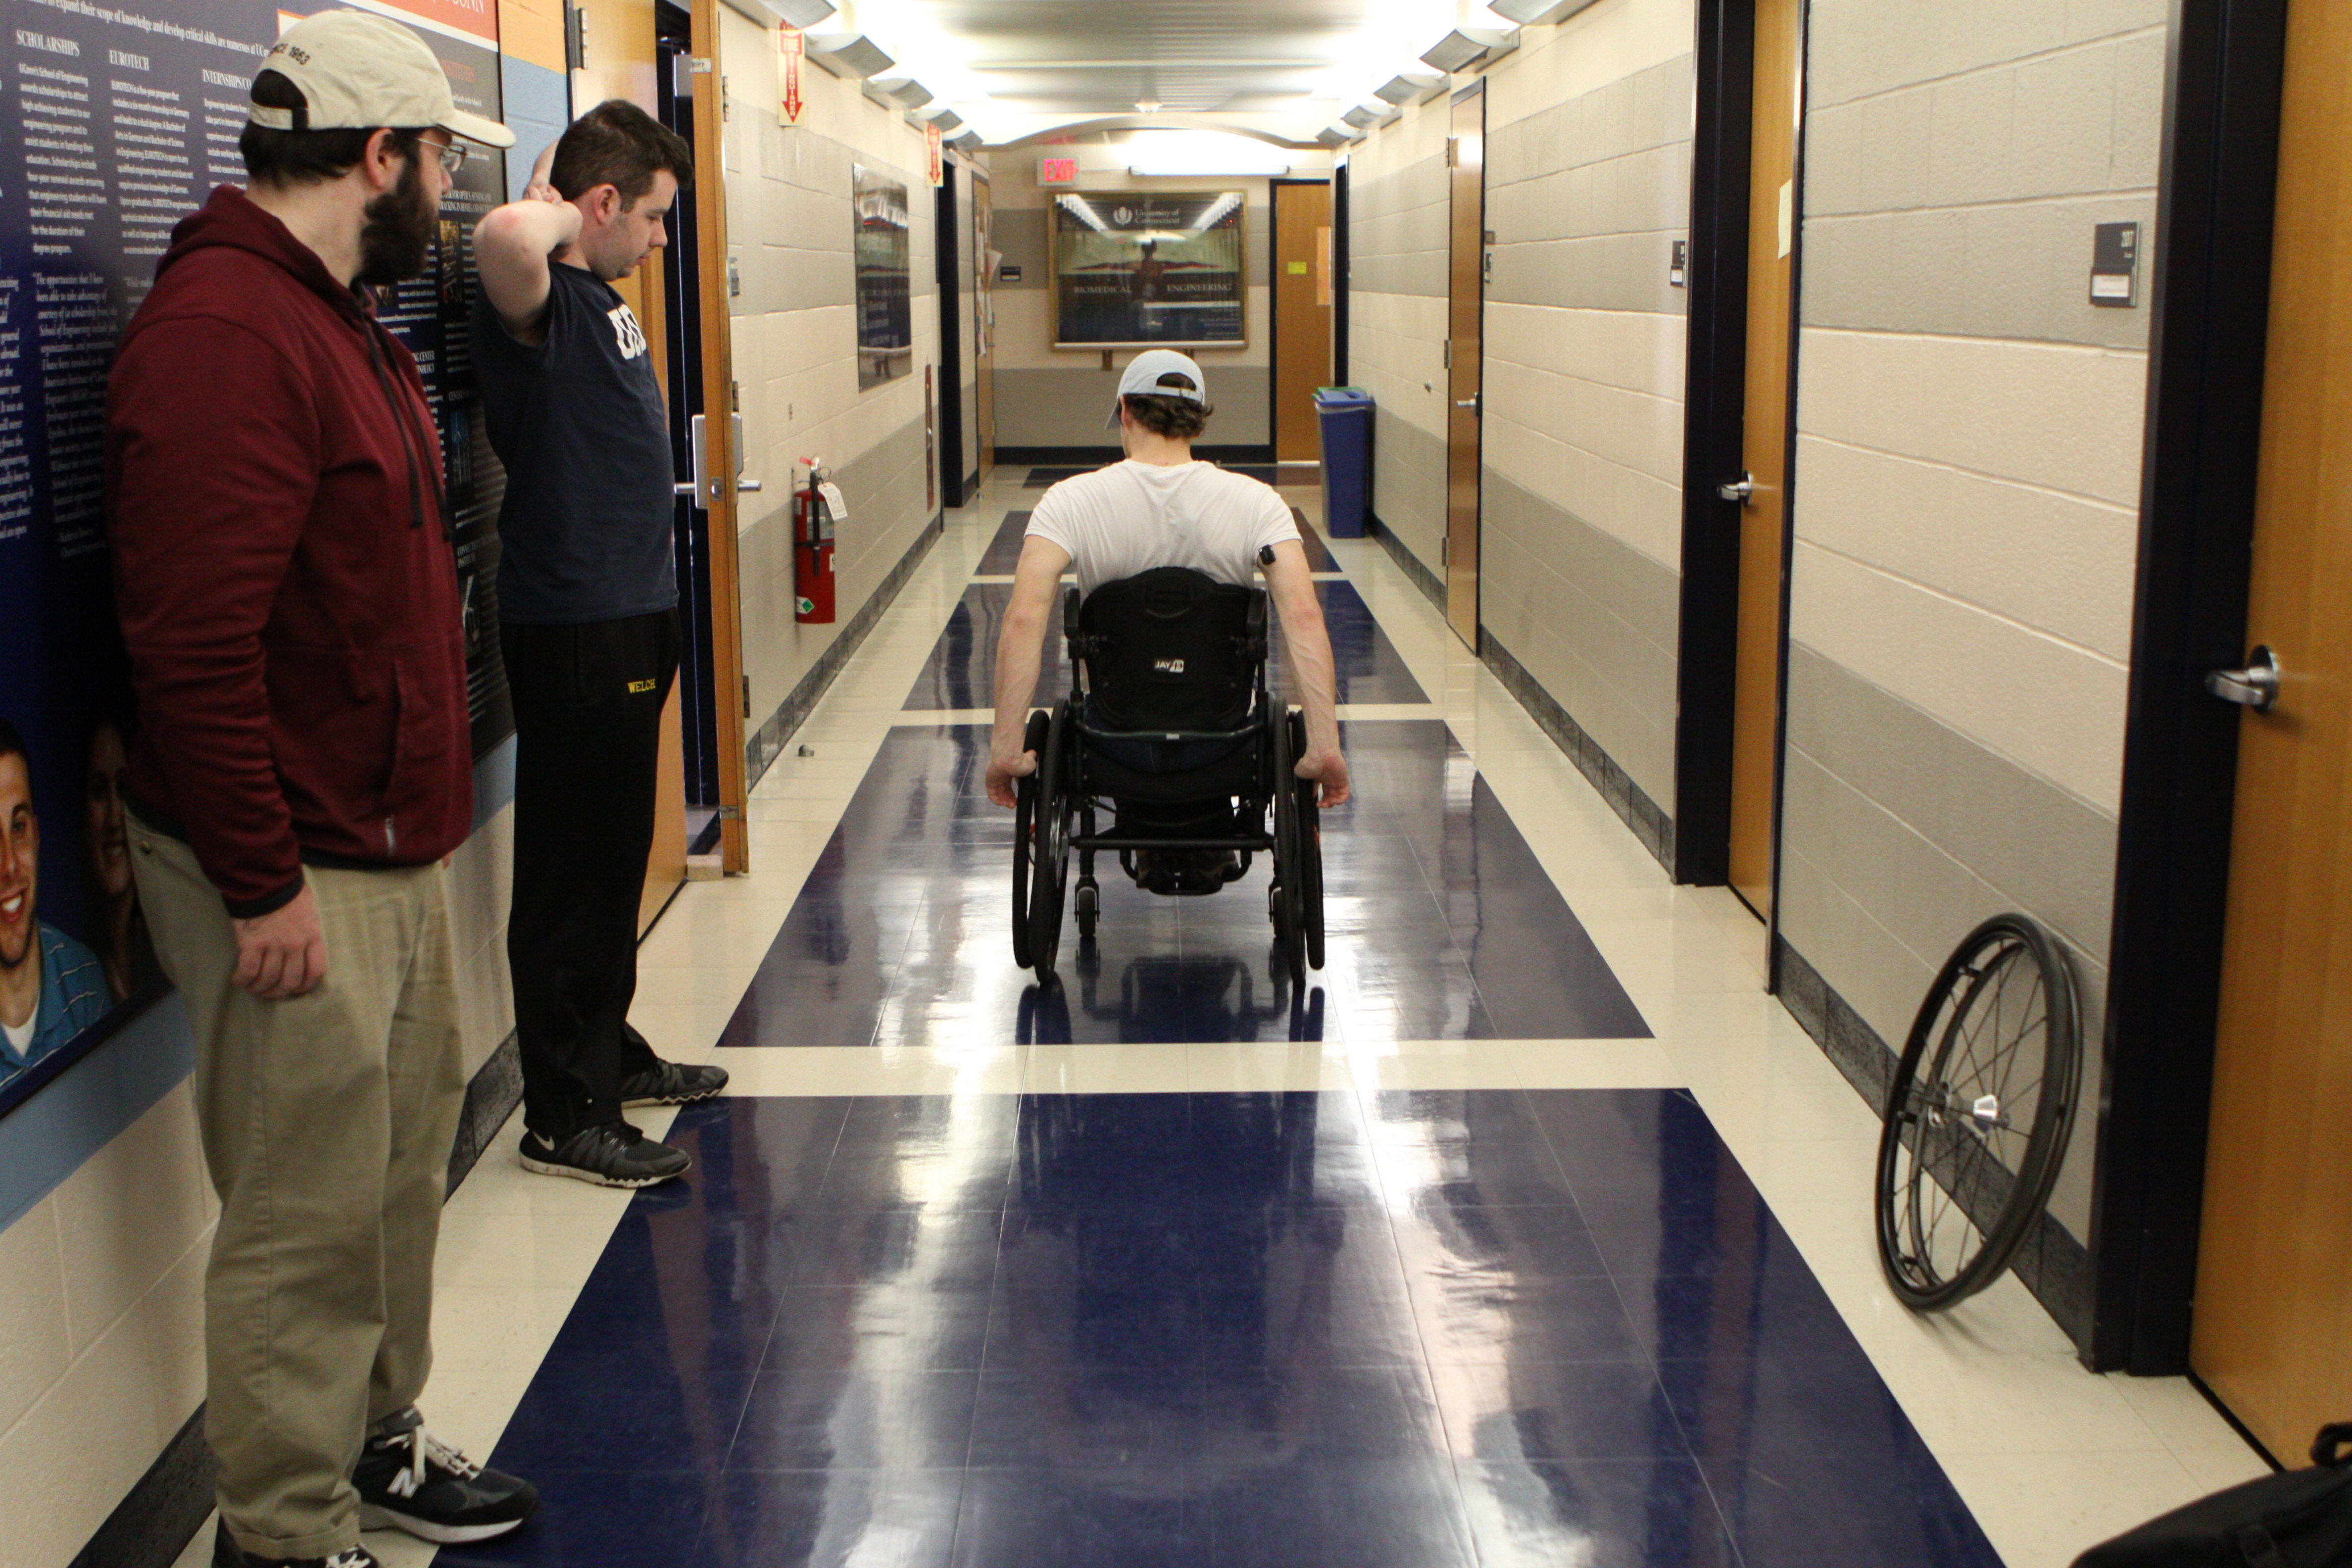 Mitchell DuBuc, center, tests the new wheels in the Arthur B. Bronwell Building at UConn. (Eli Freund/UConn Photo)